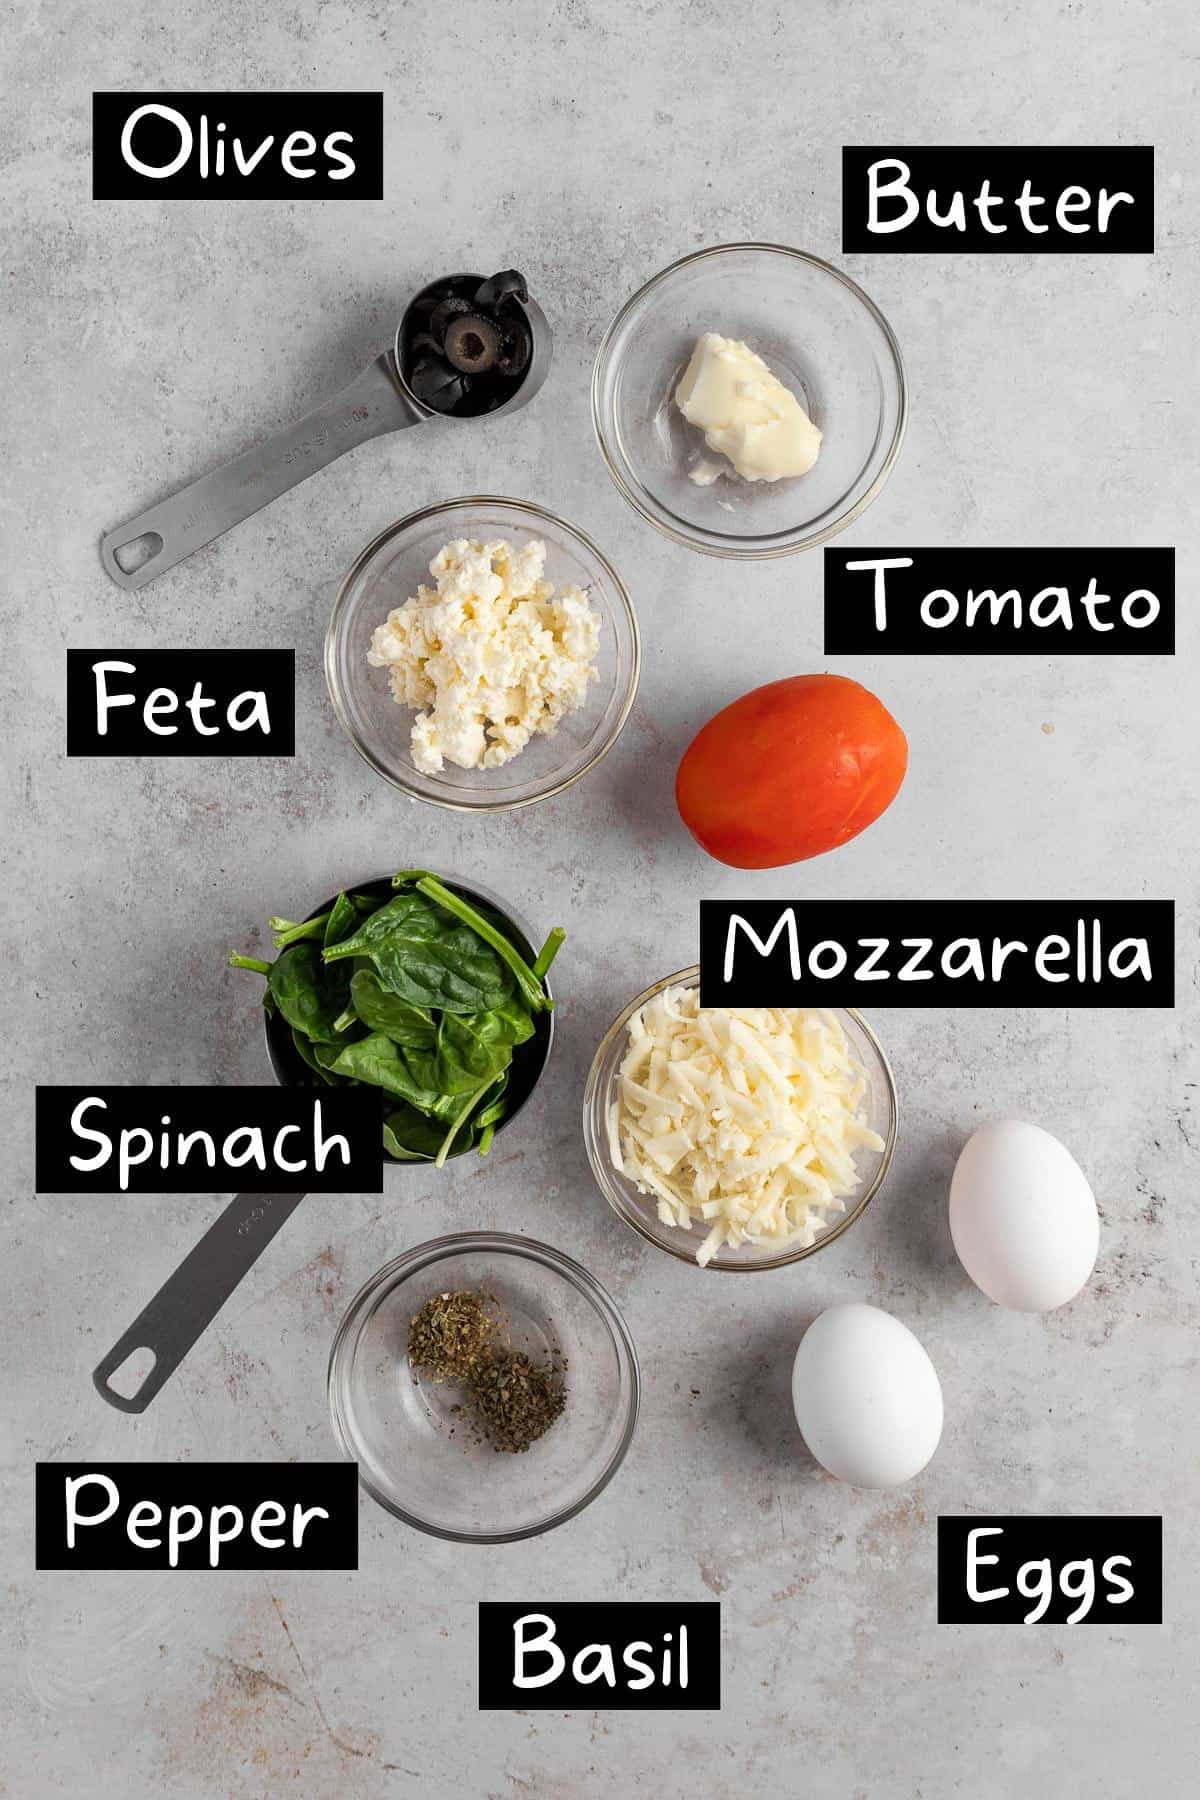 An overhead view of the ingredients needed to make the omelette.